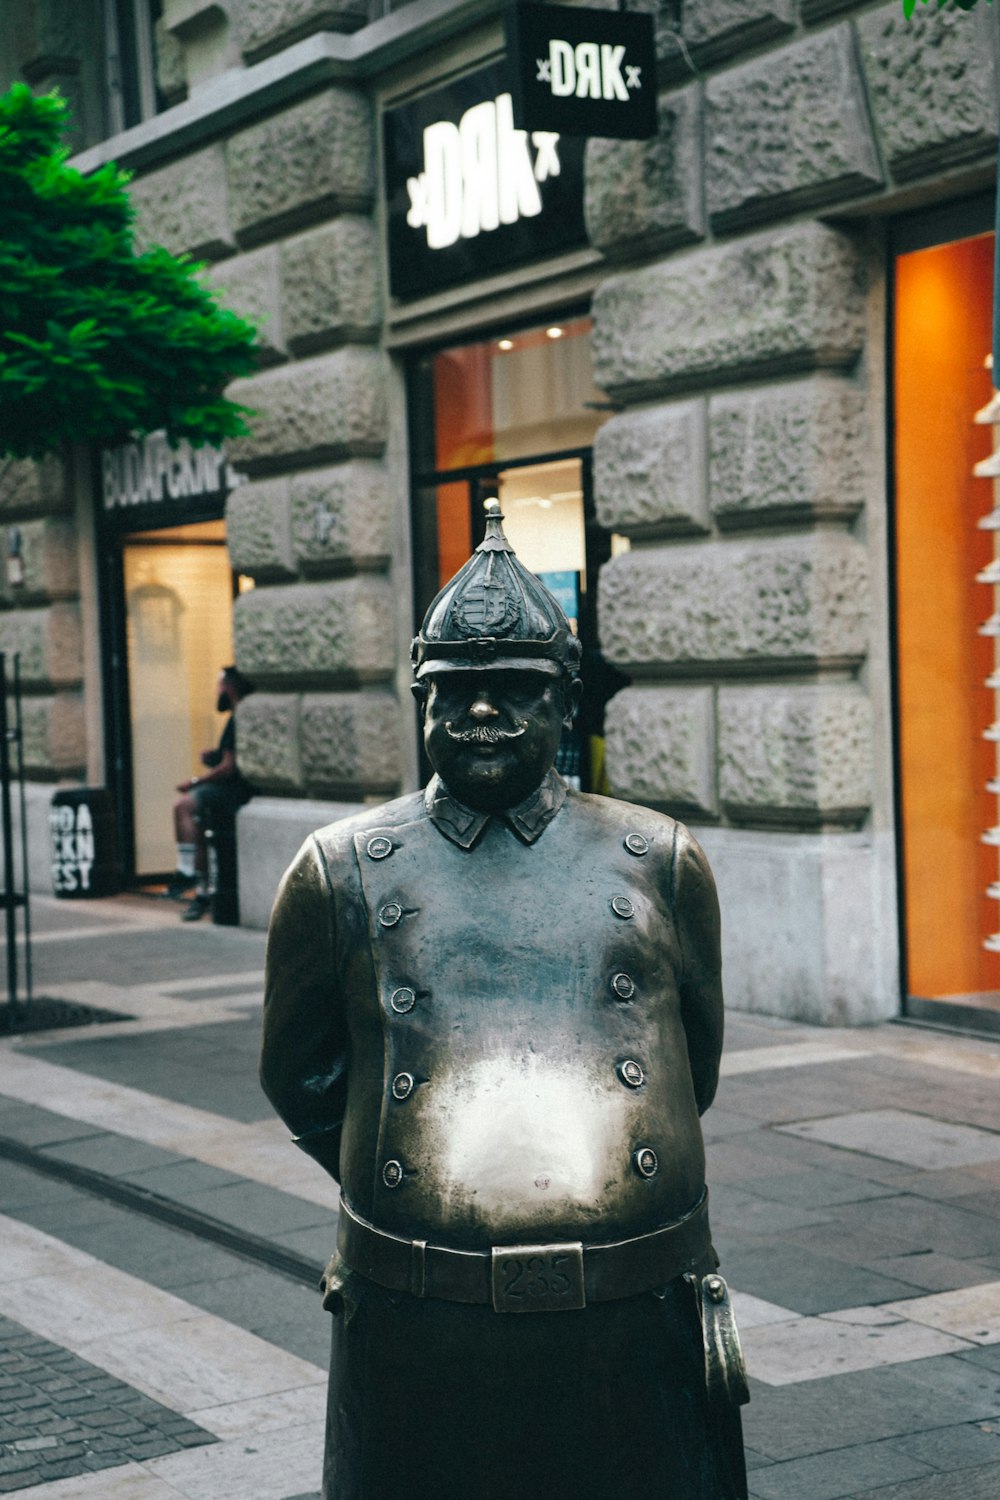 a statue of a person wearing a mask and a hat